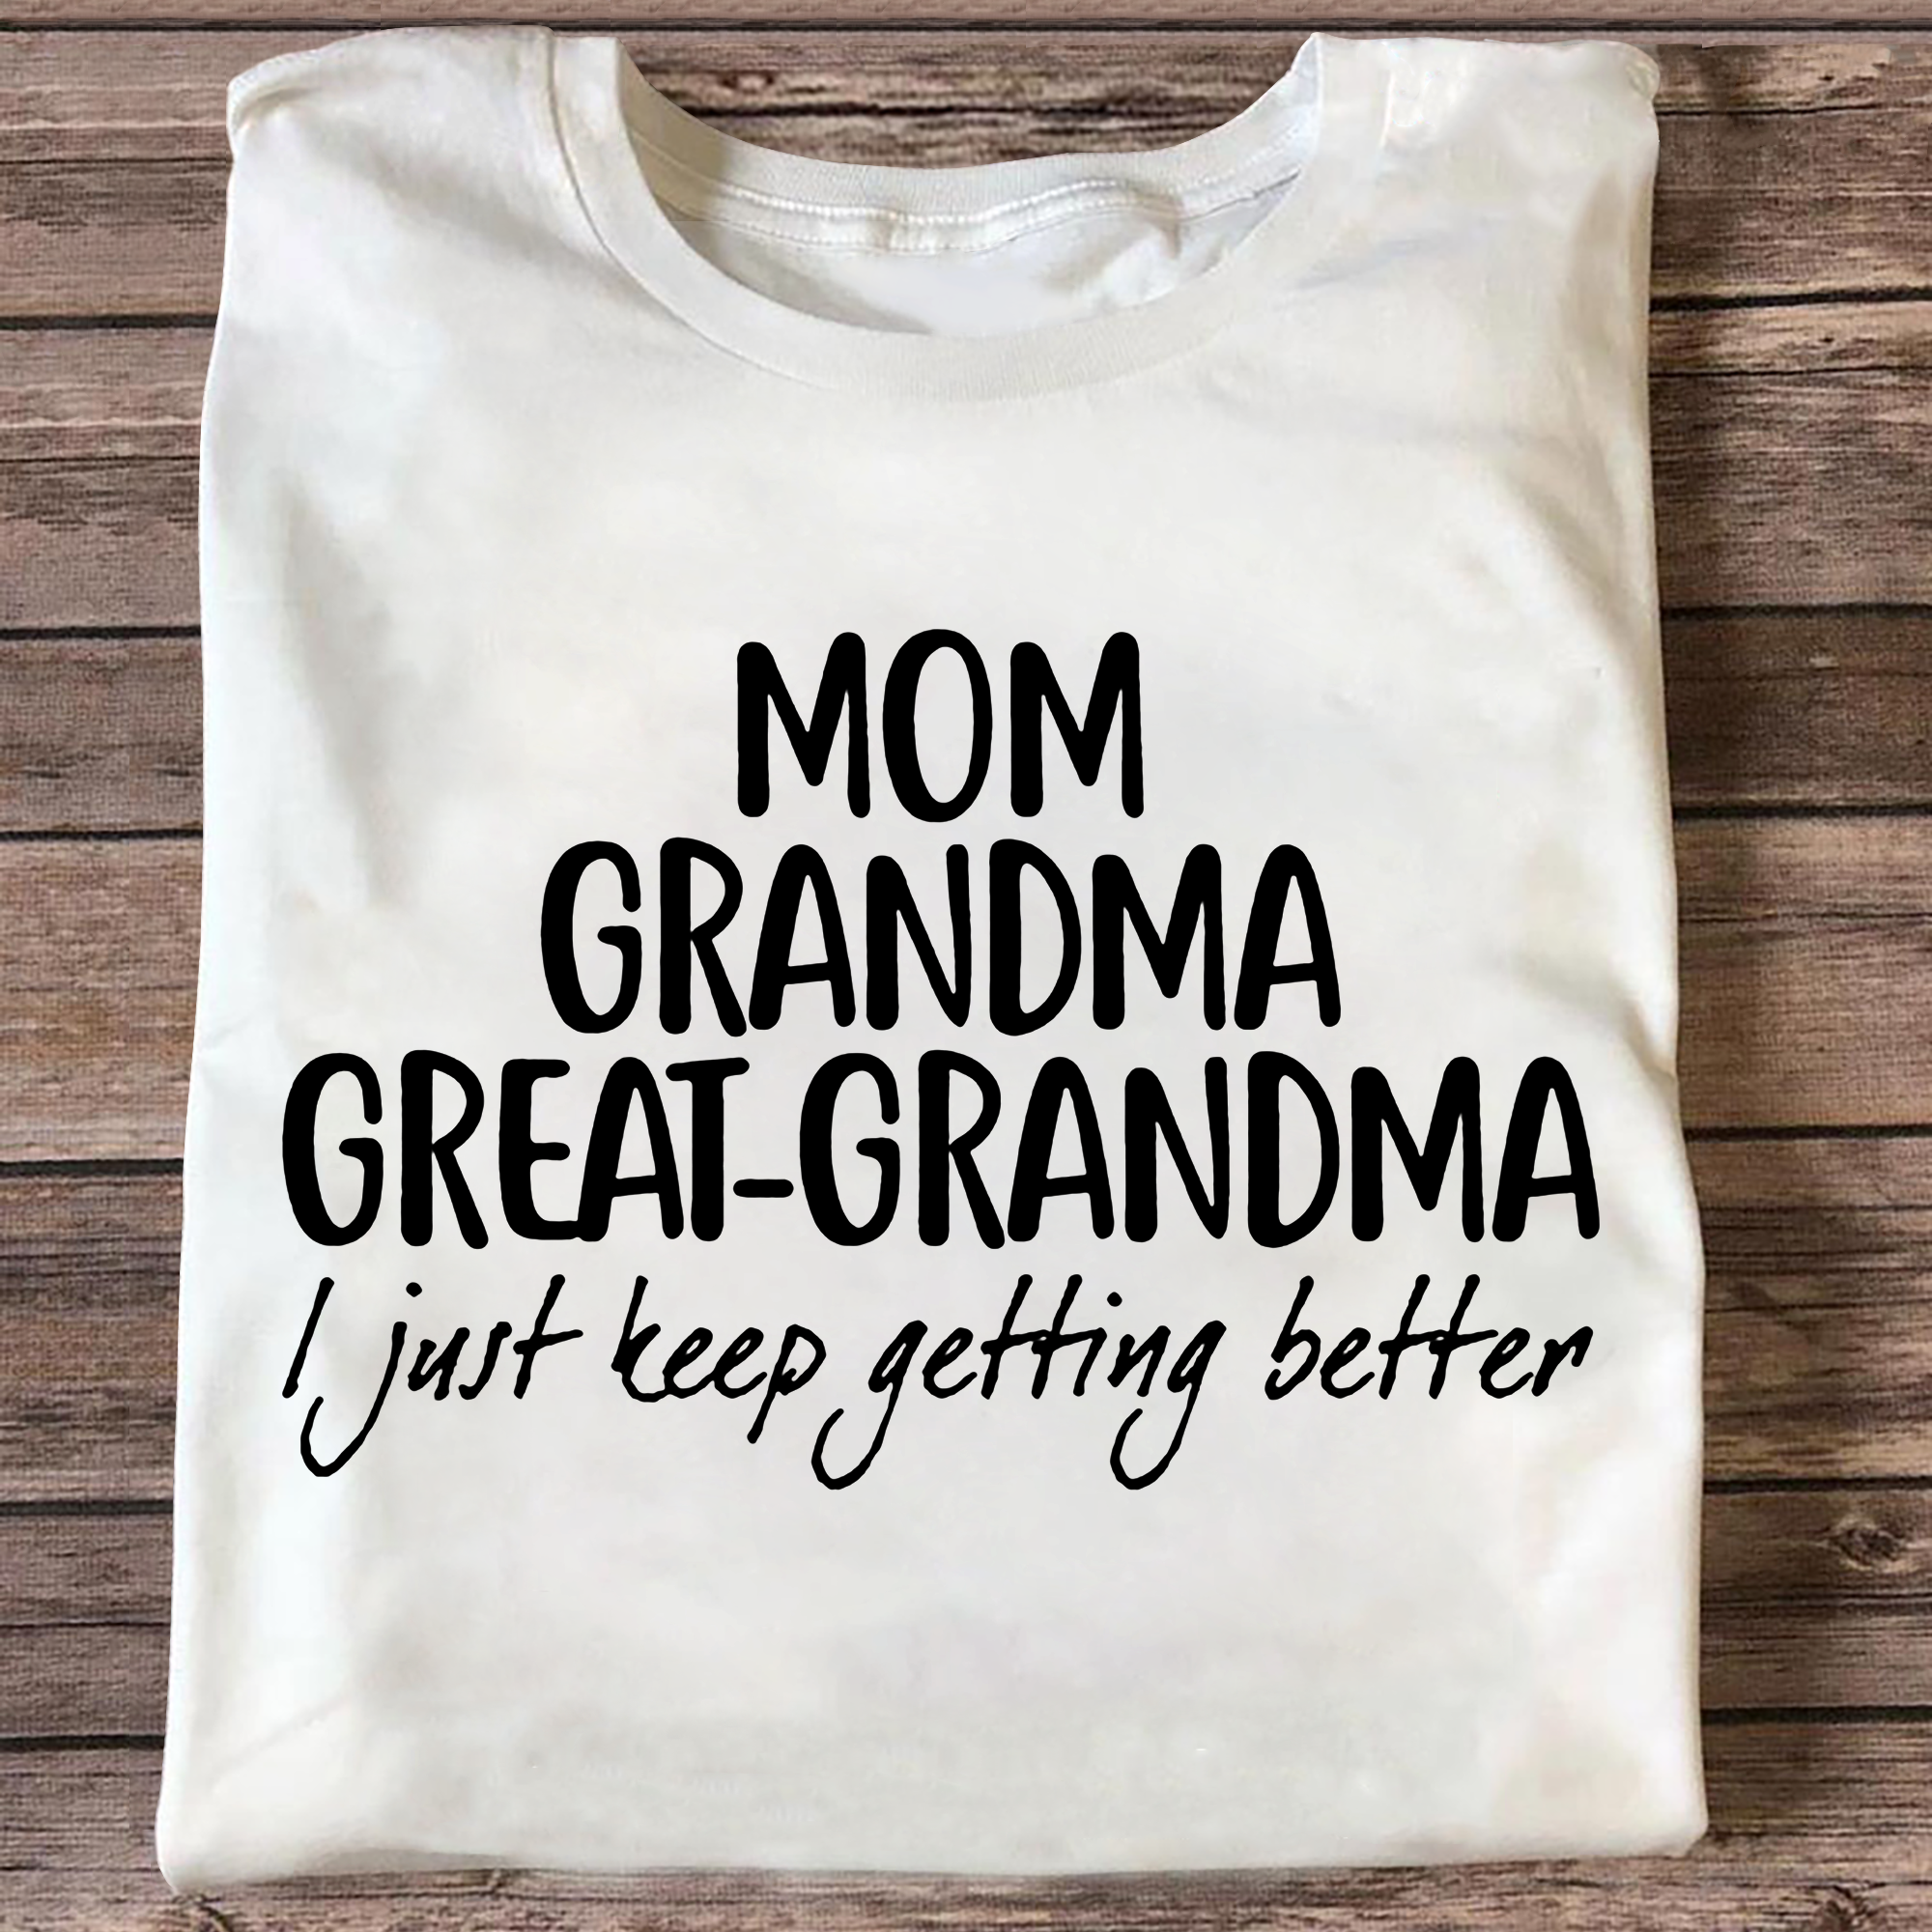 I Just Keep Getting Better - T-shirt - Mother's Day Gift For Grandma